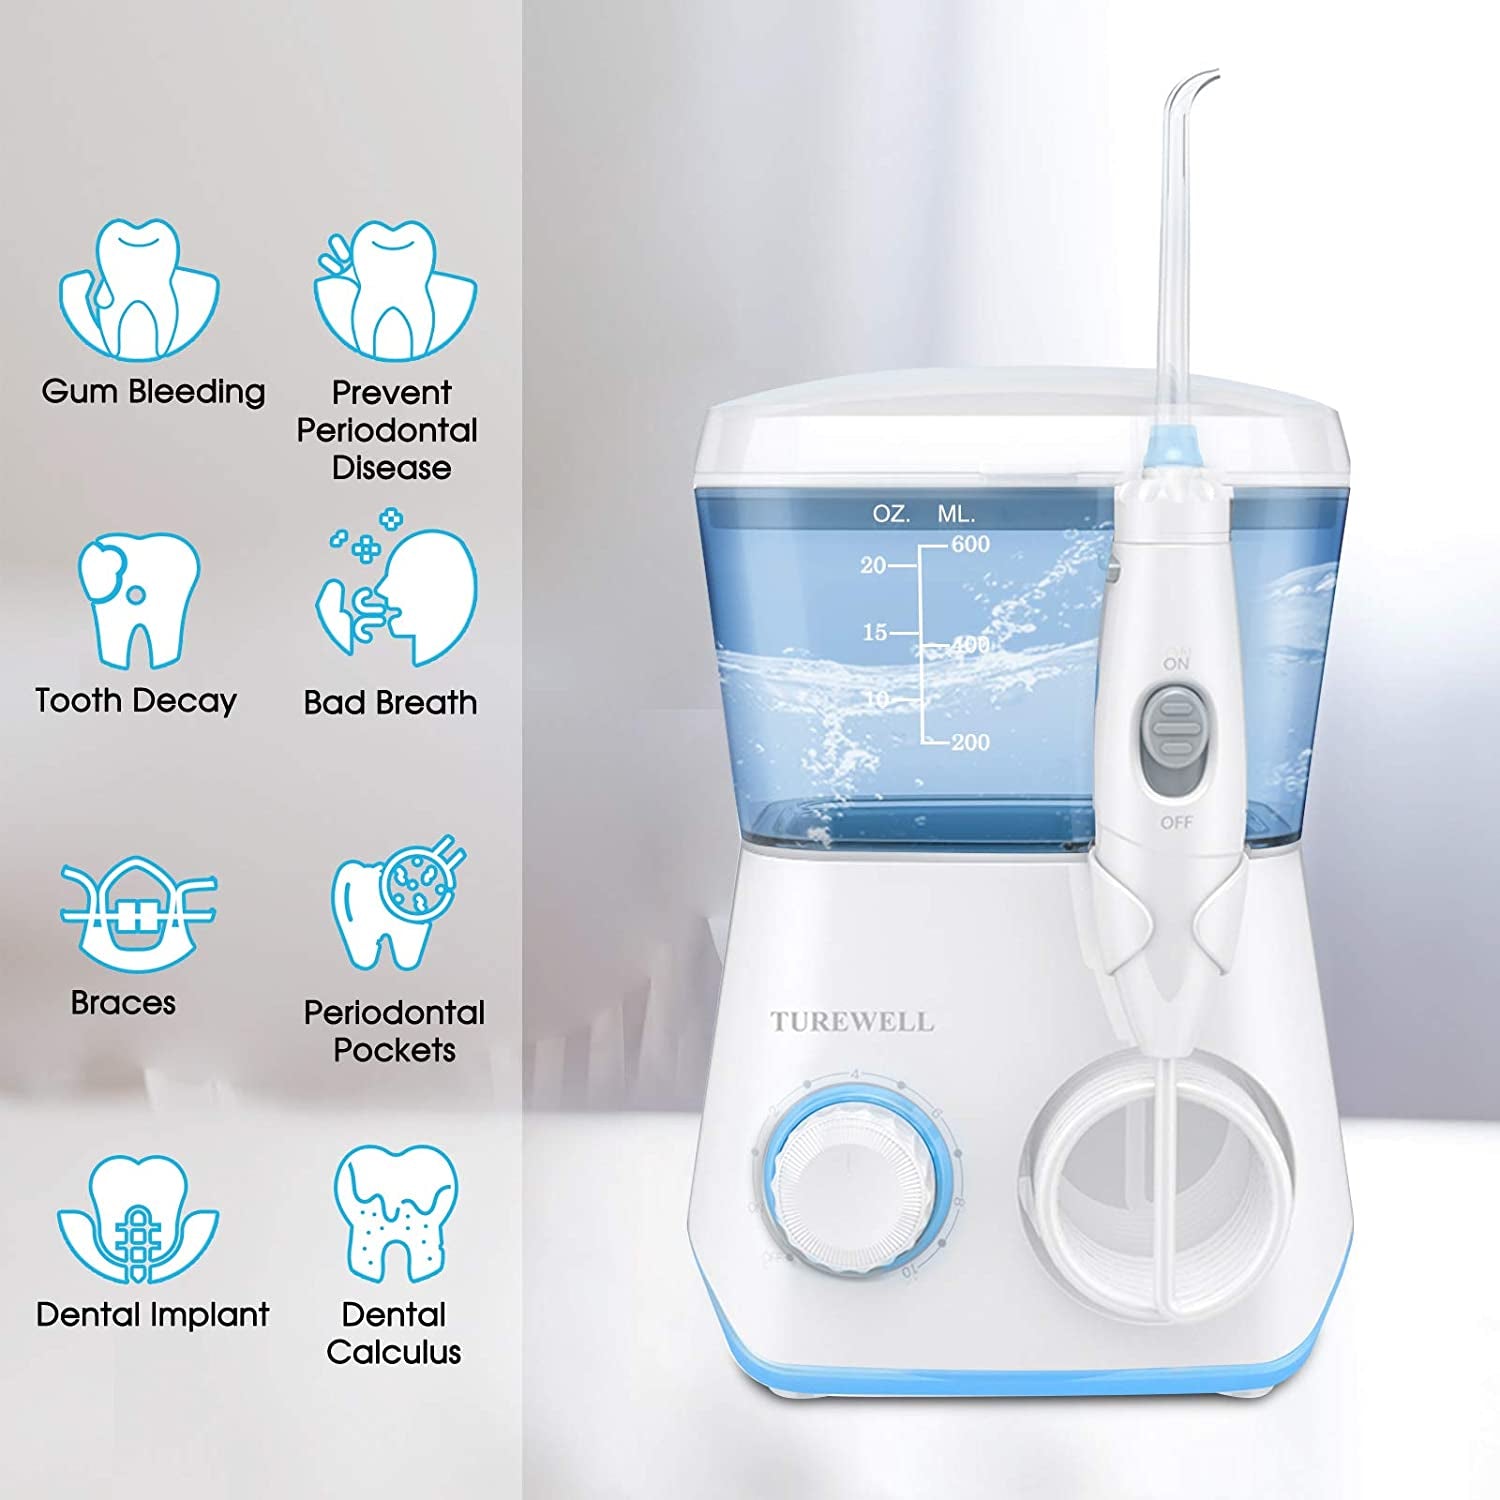 Water Flossing Oral Irrigator, 600ML Dental Cleaner 10 Adjustable Pressure, Electric Oral Flosser for Teeth/Braces, 8 Water Jet Tips for Family (White)